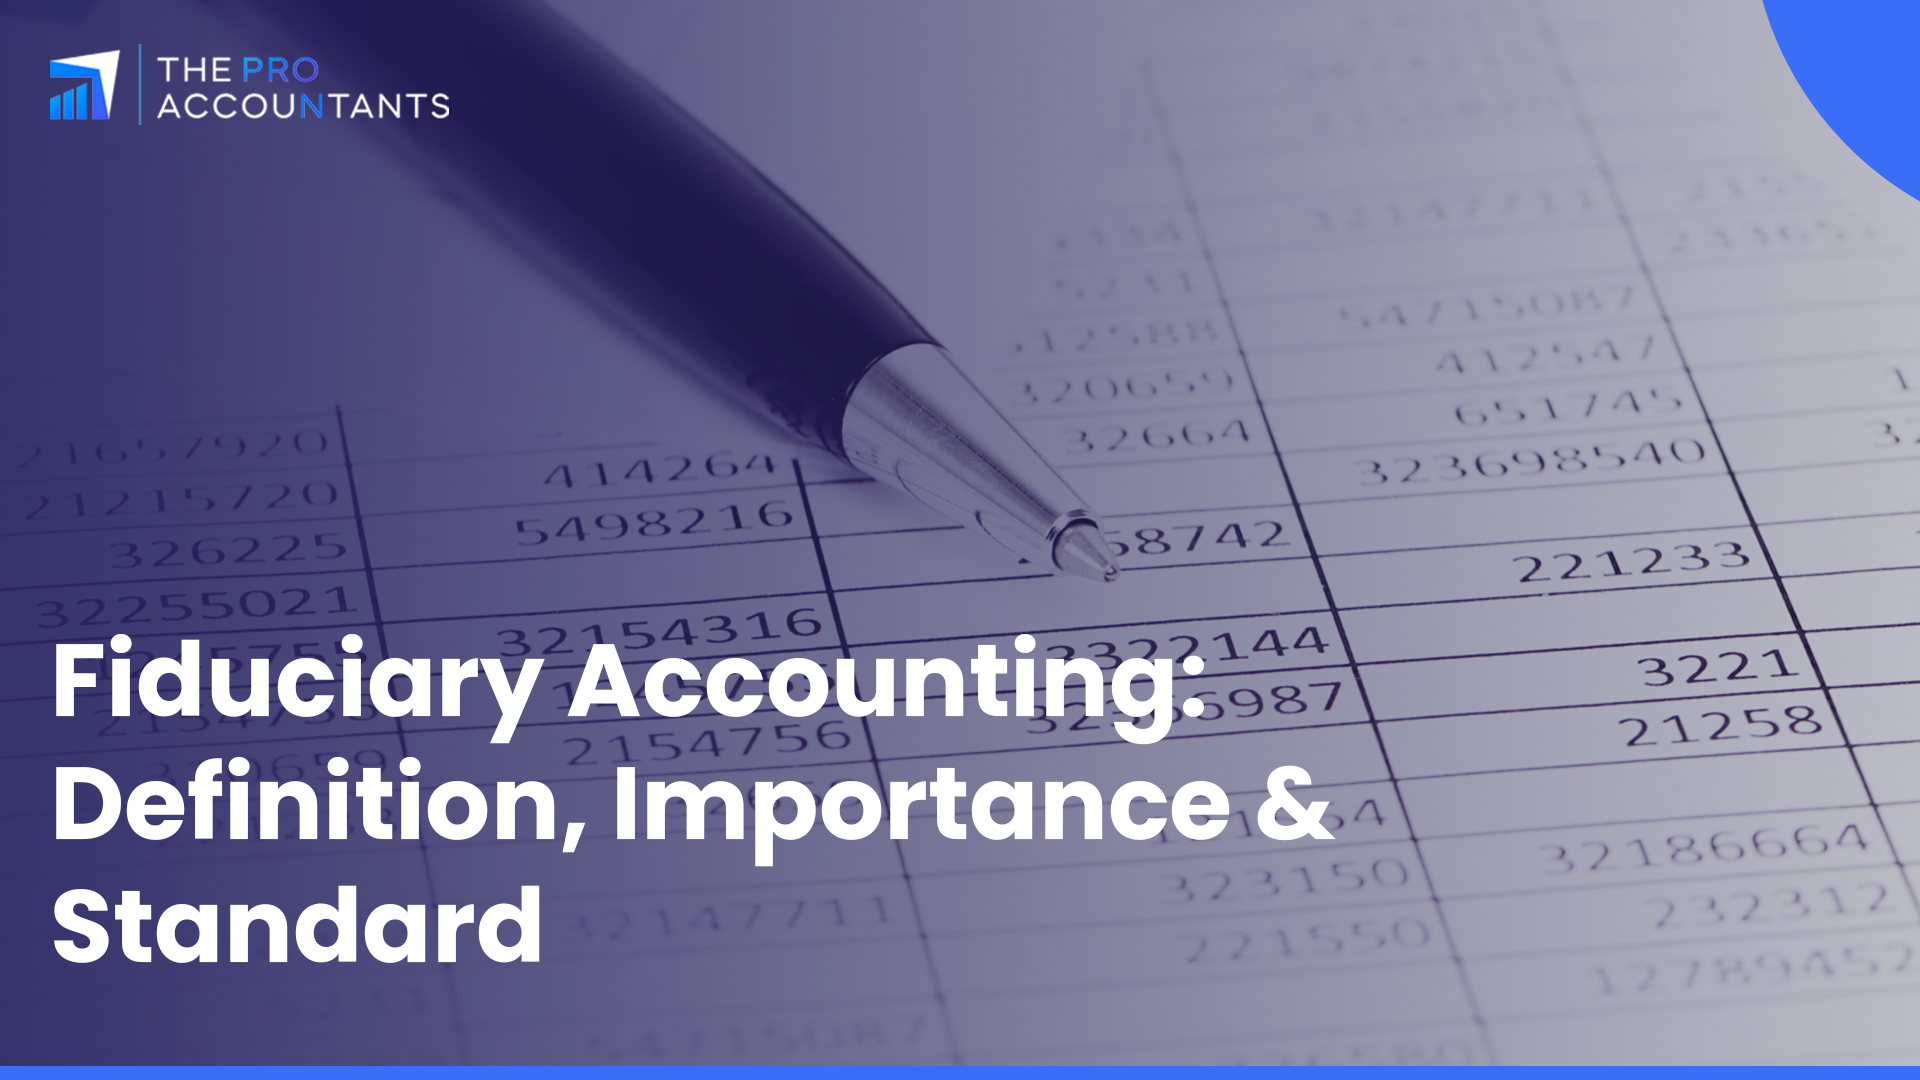 What is Fiduciary Accounting?